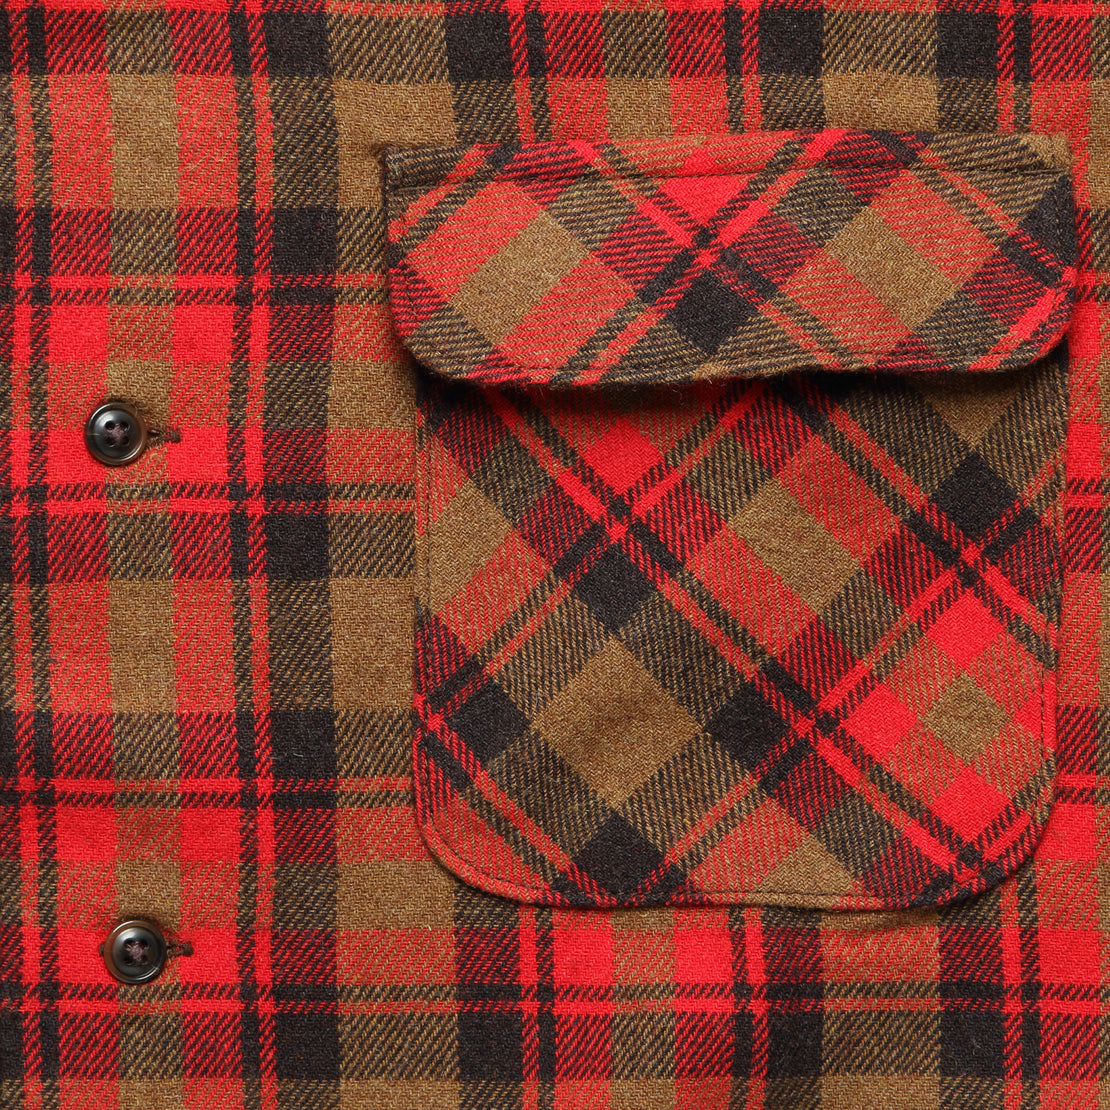 Buckner Wool Camp Shirt - Red Dark Earth/Brown Plaid - Filson - STAG Provisions - Tops - L/S Woven - Plaid